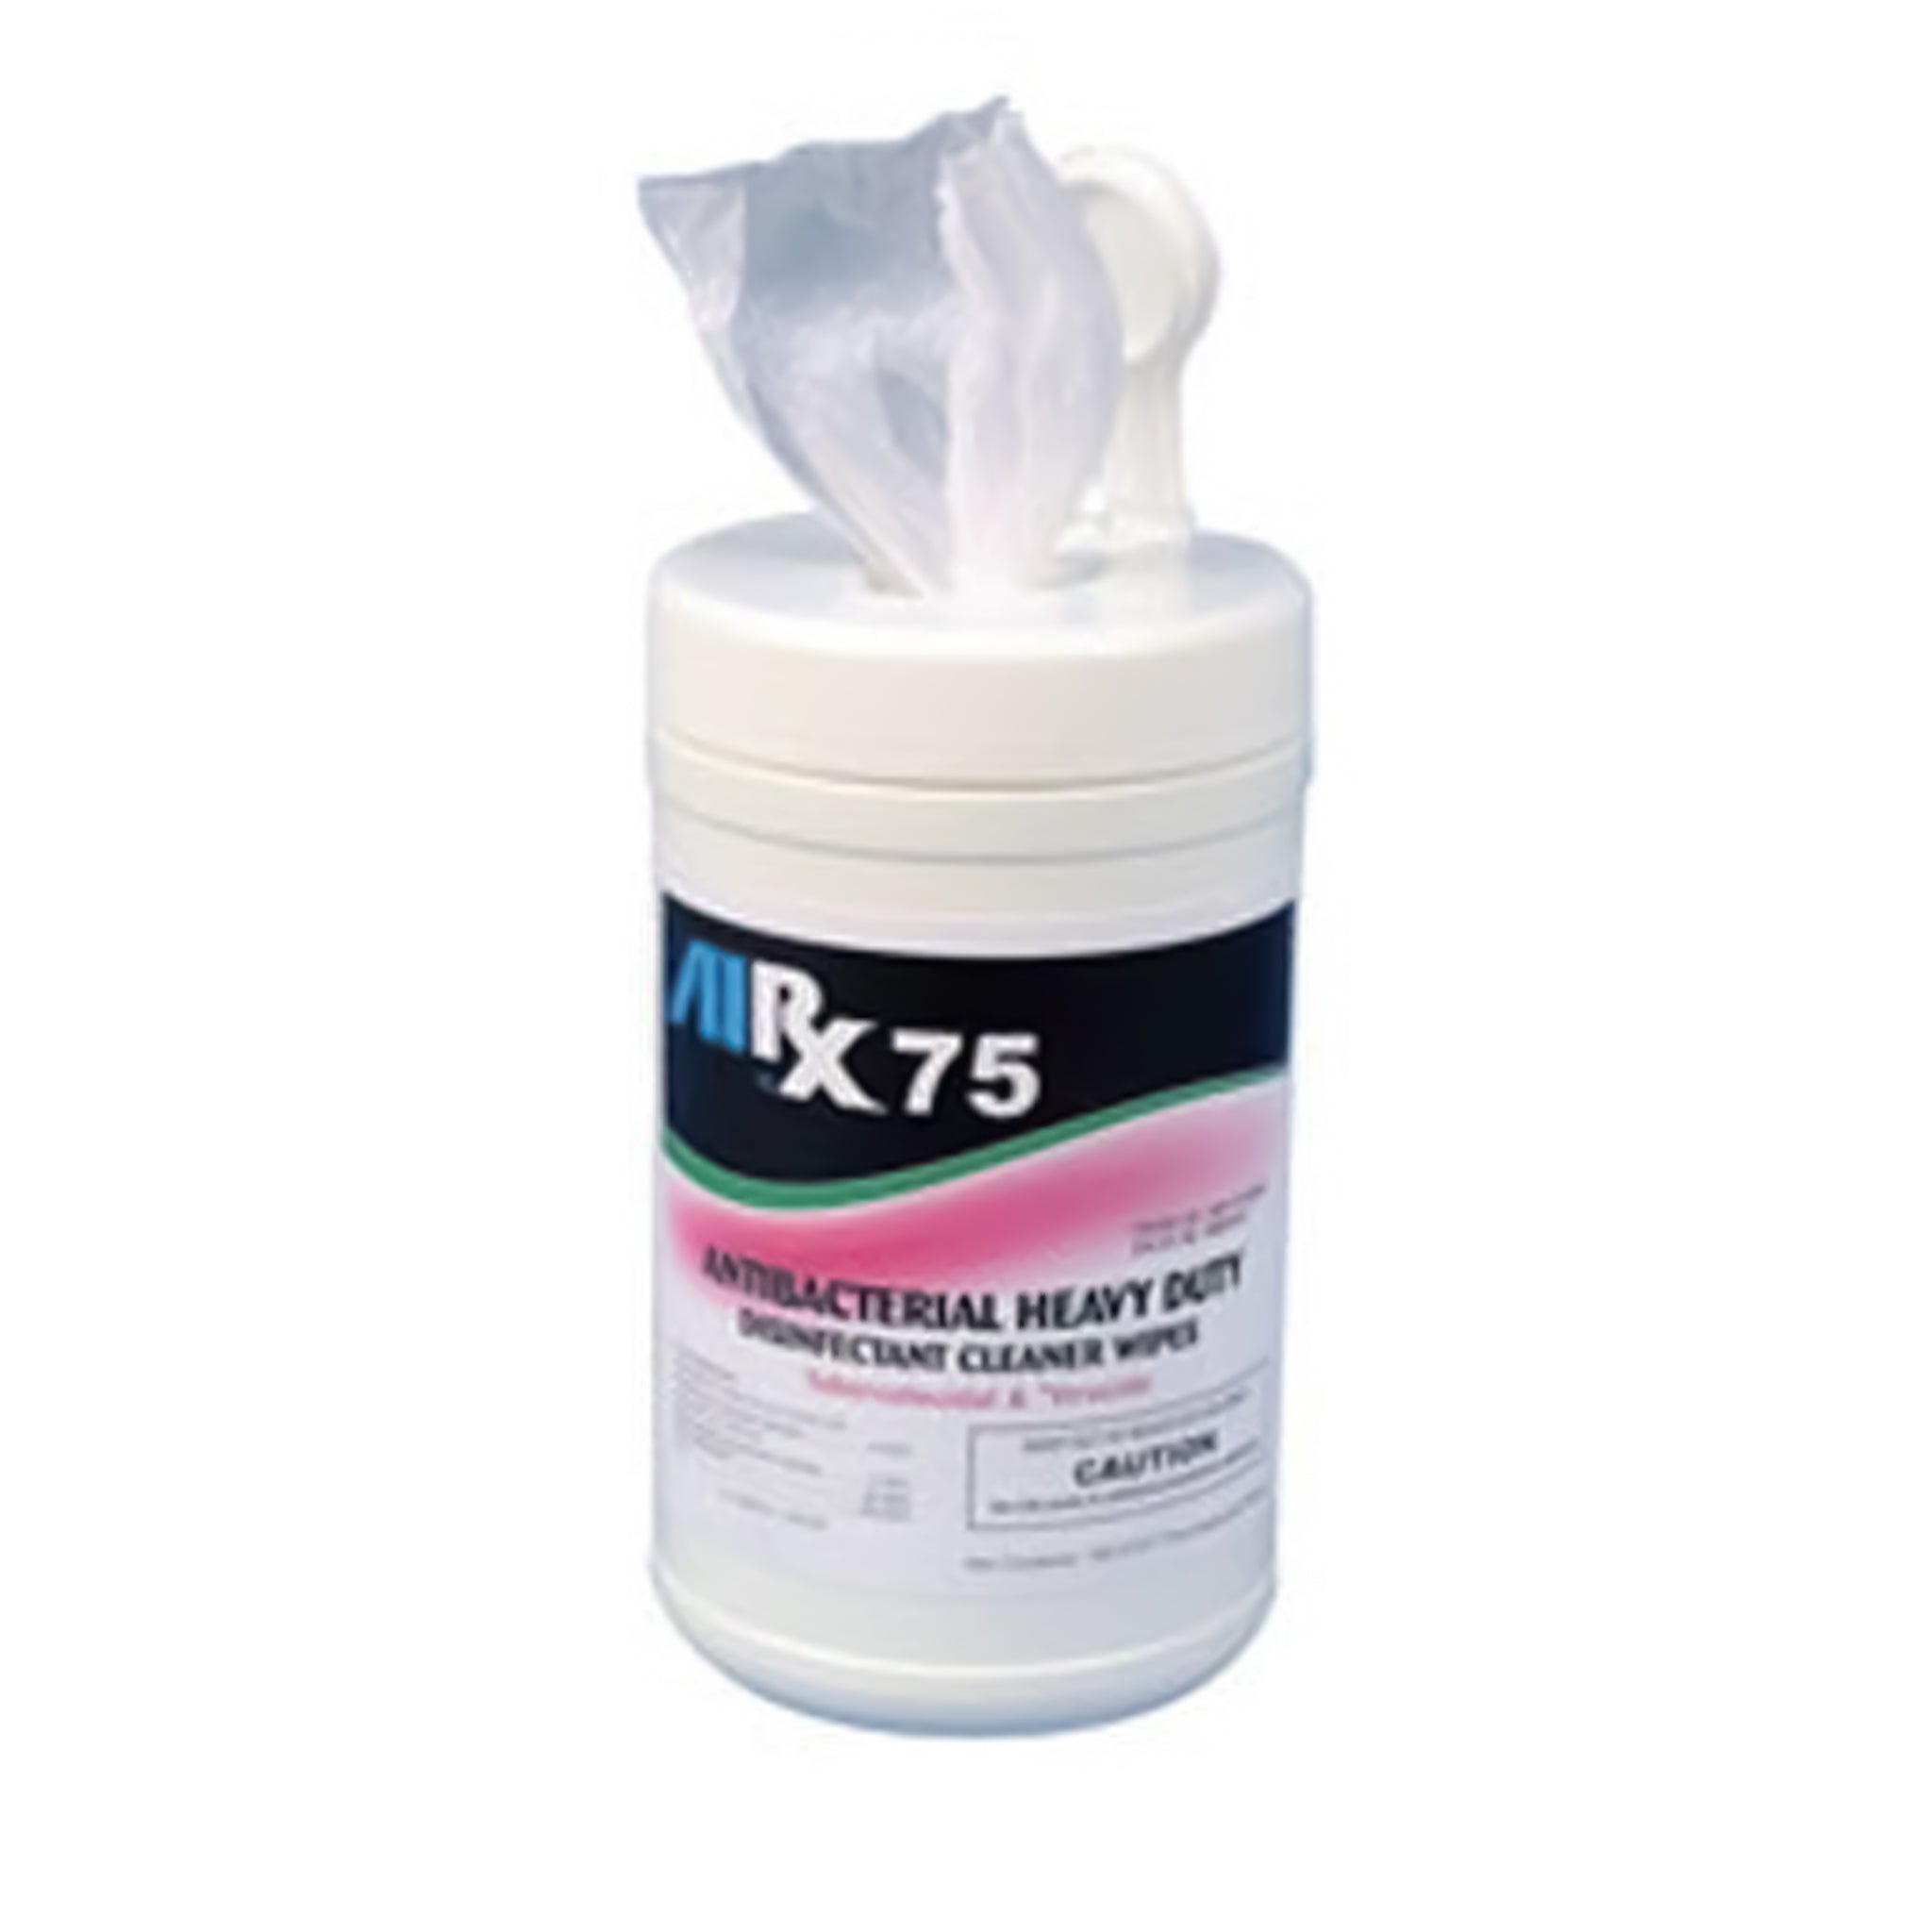 AIRX-75 Athletic Surface Disinfectant Wipes